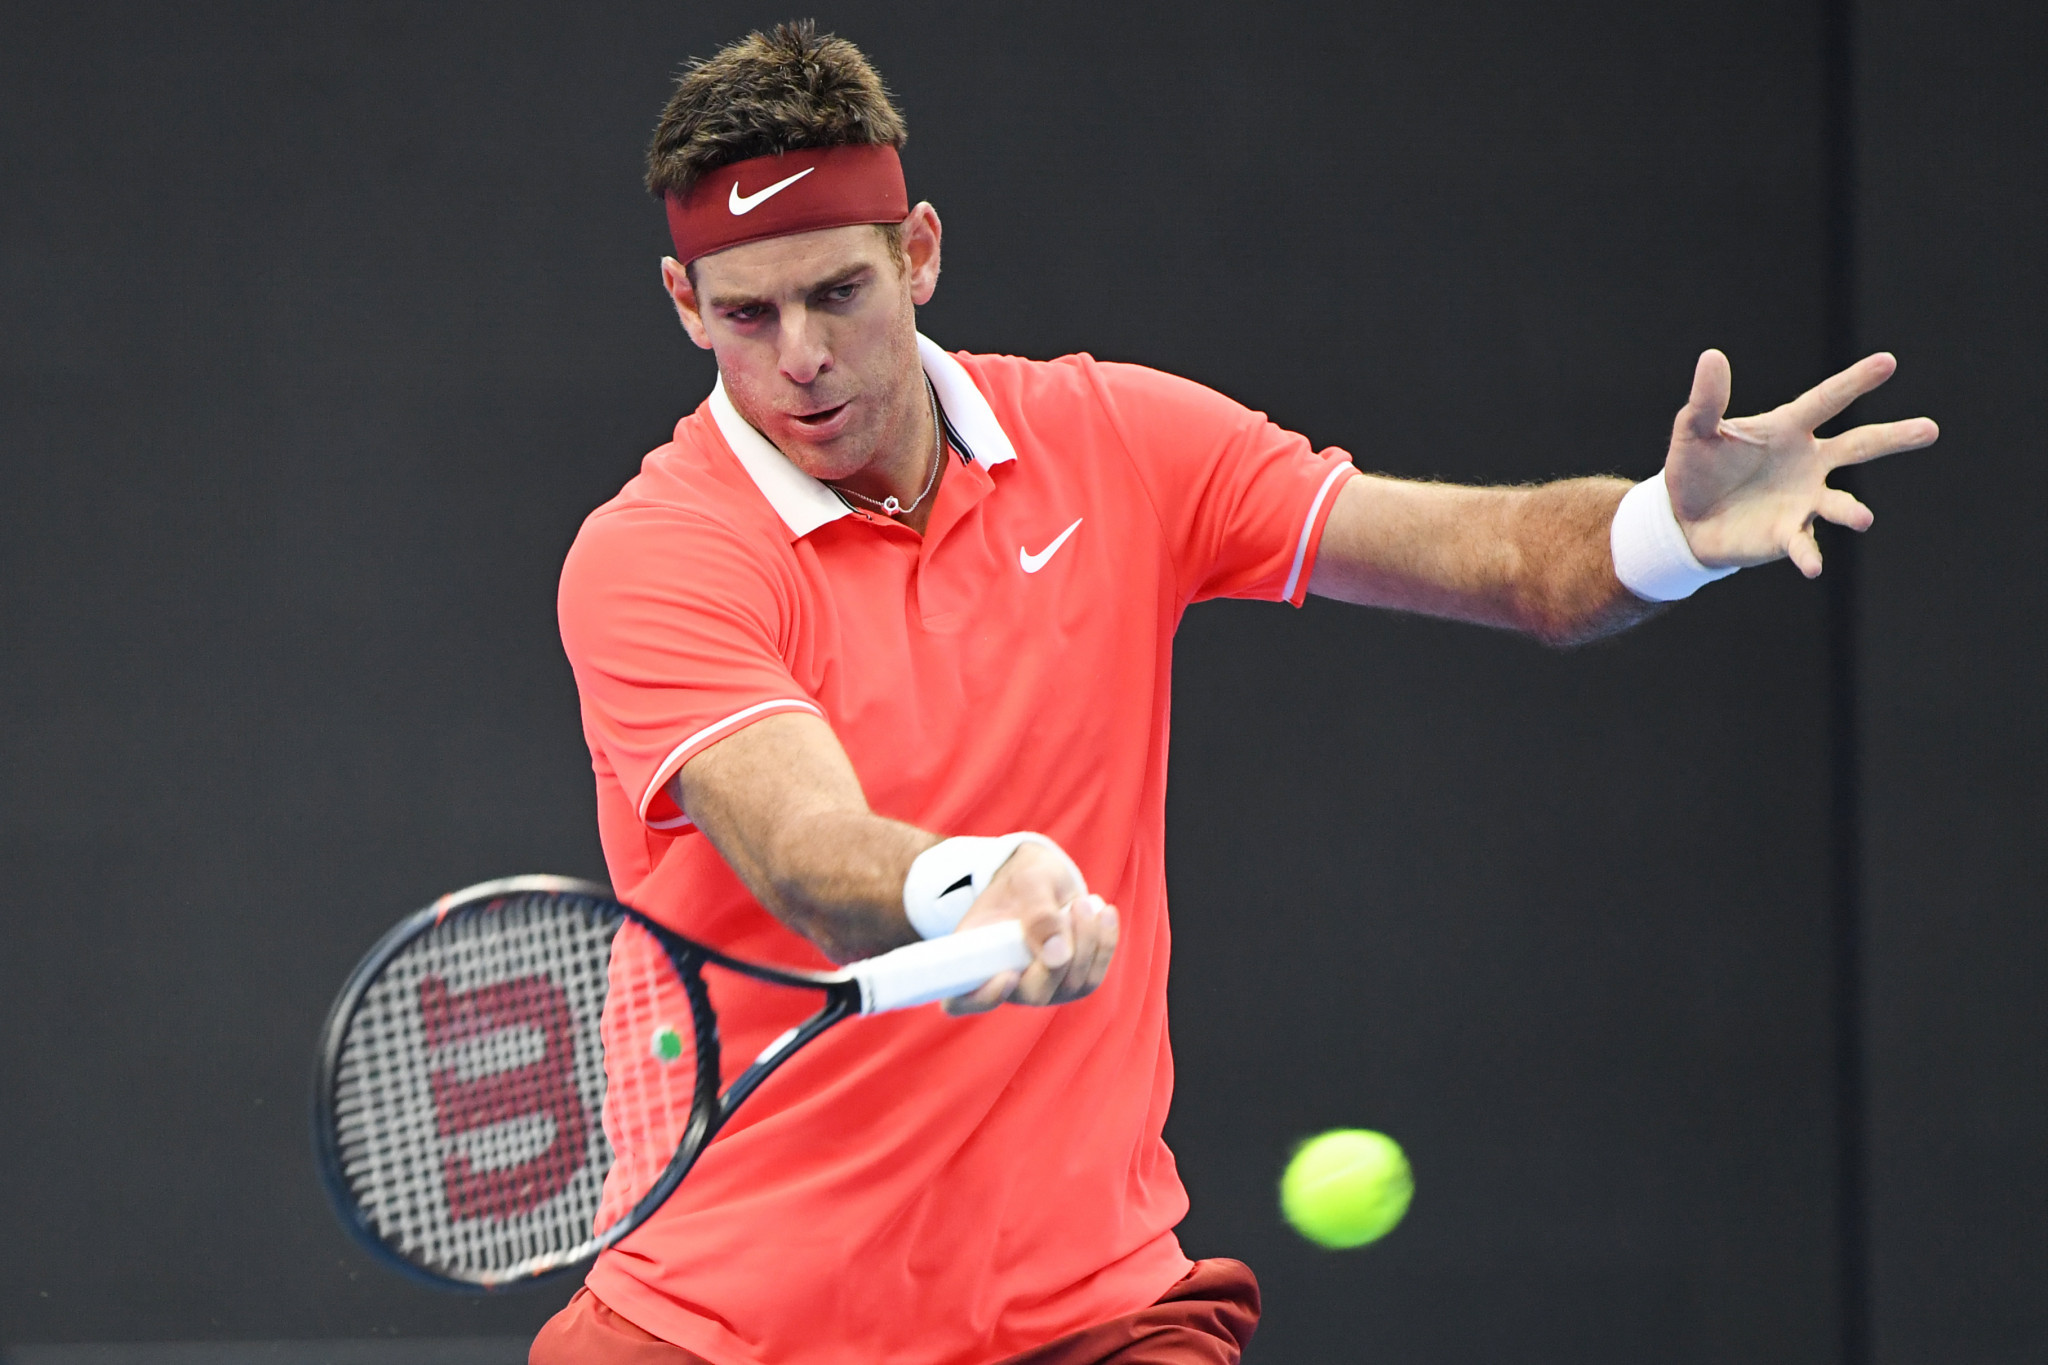 Argentina's Juan Martin del Potro is the top seed and into the second round of the Beijing Open ©Getty Images